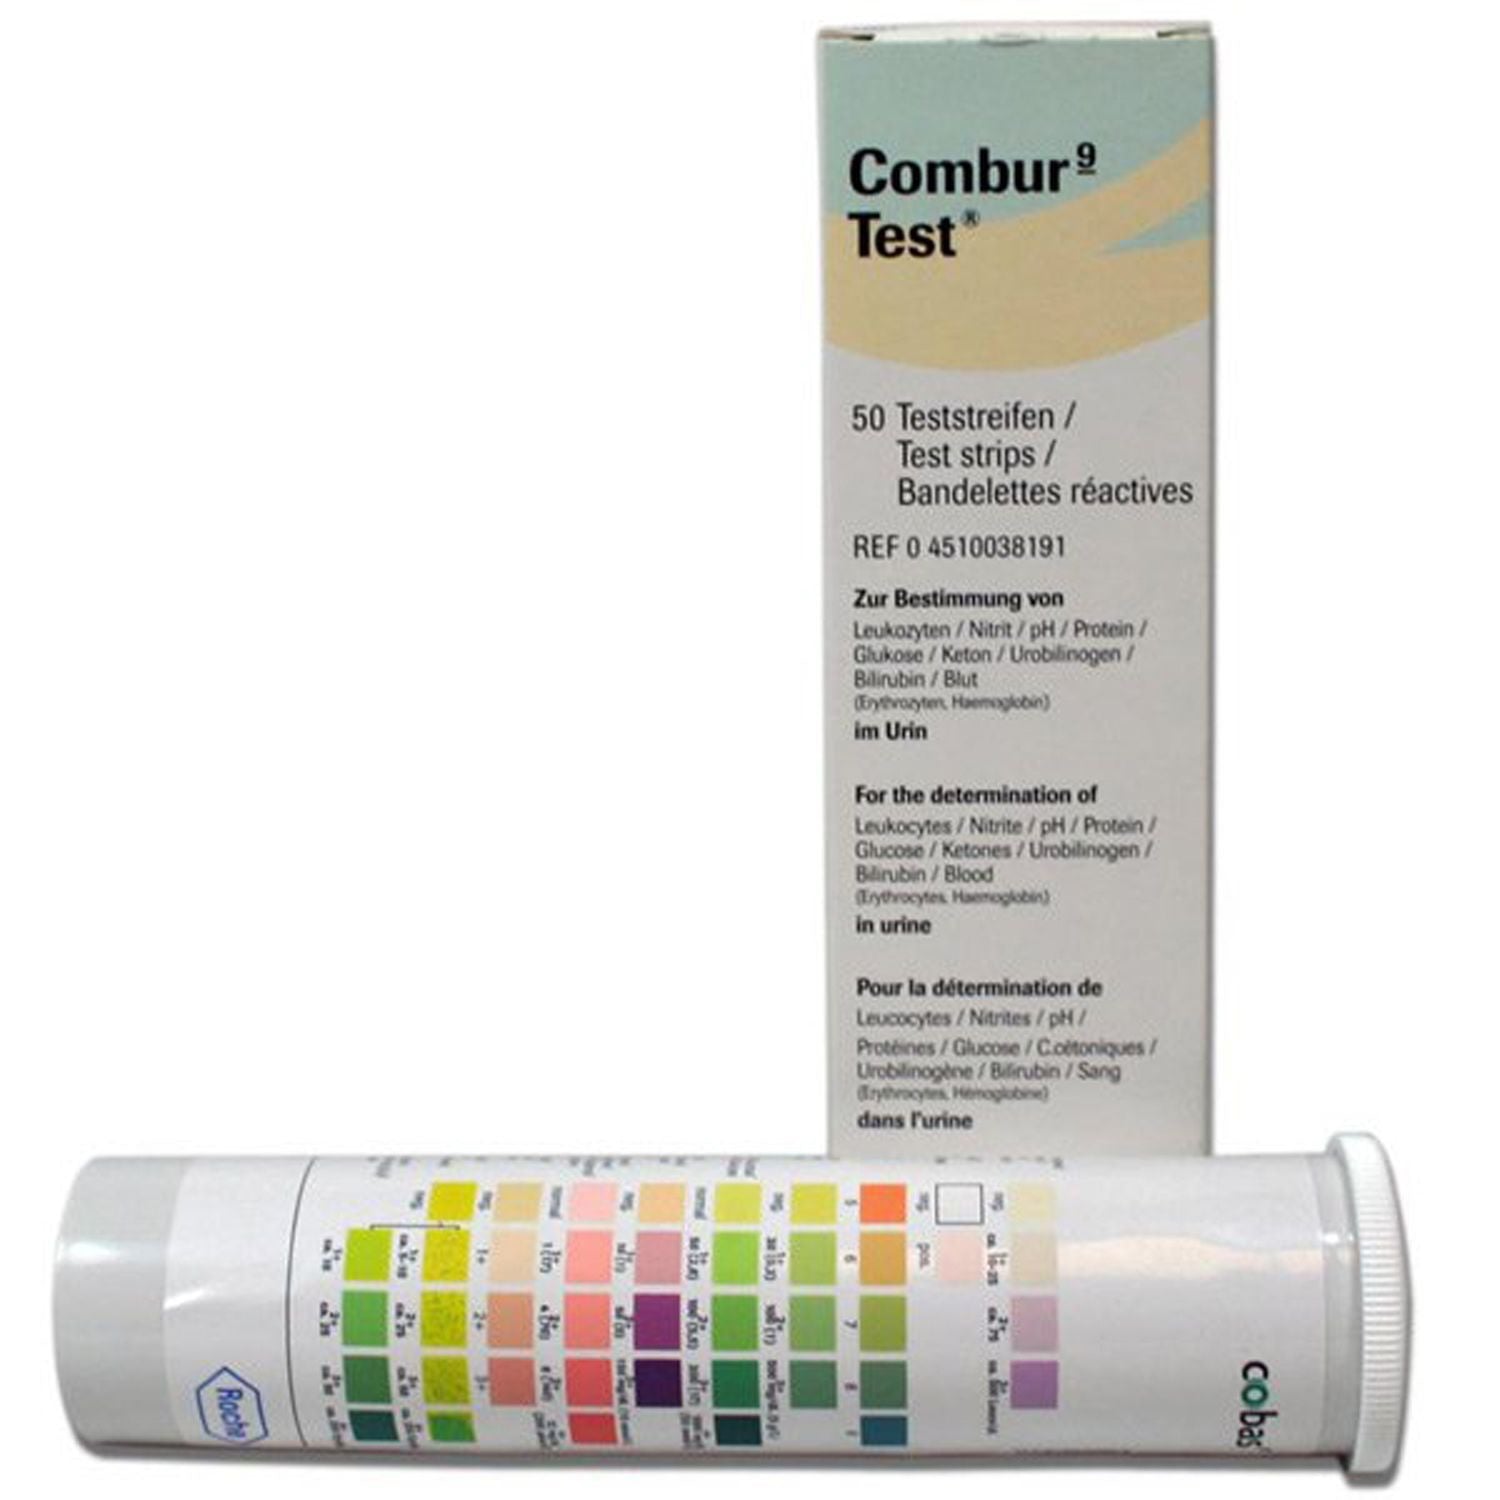 Roche Urinalysis Reagent Strips Combur9 Test | Pack of 50